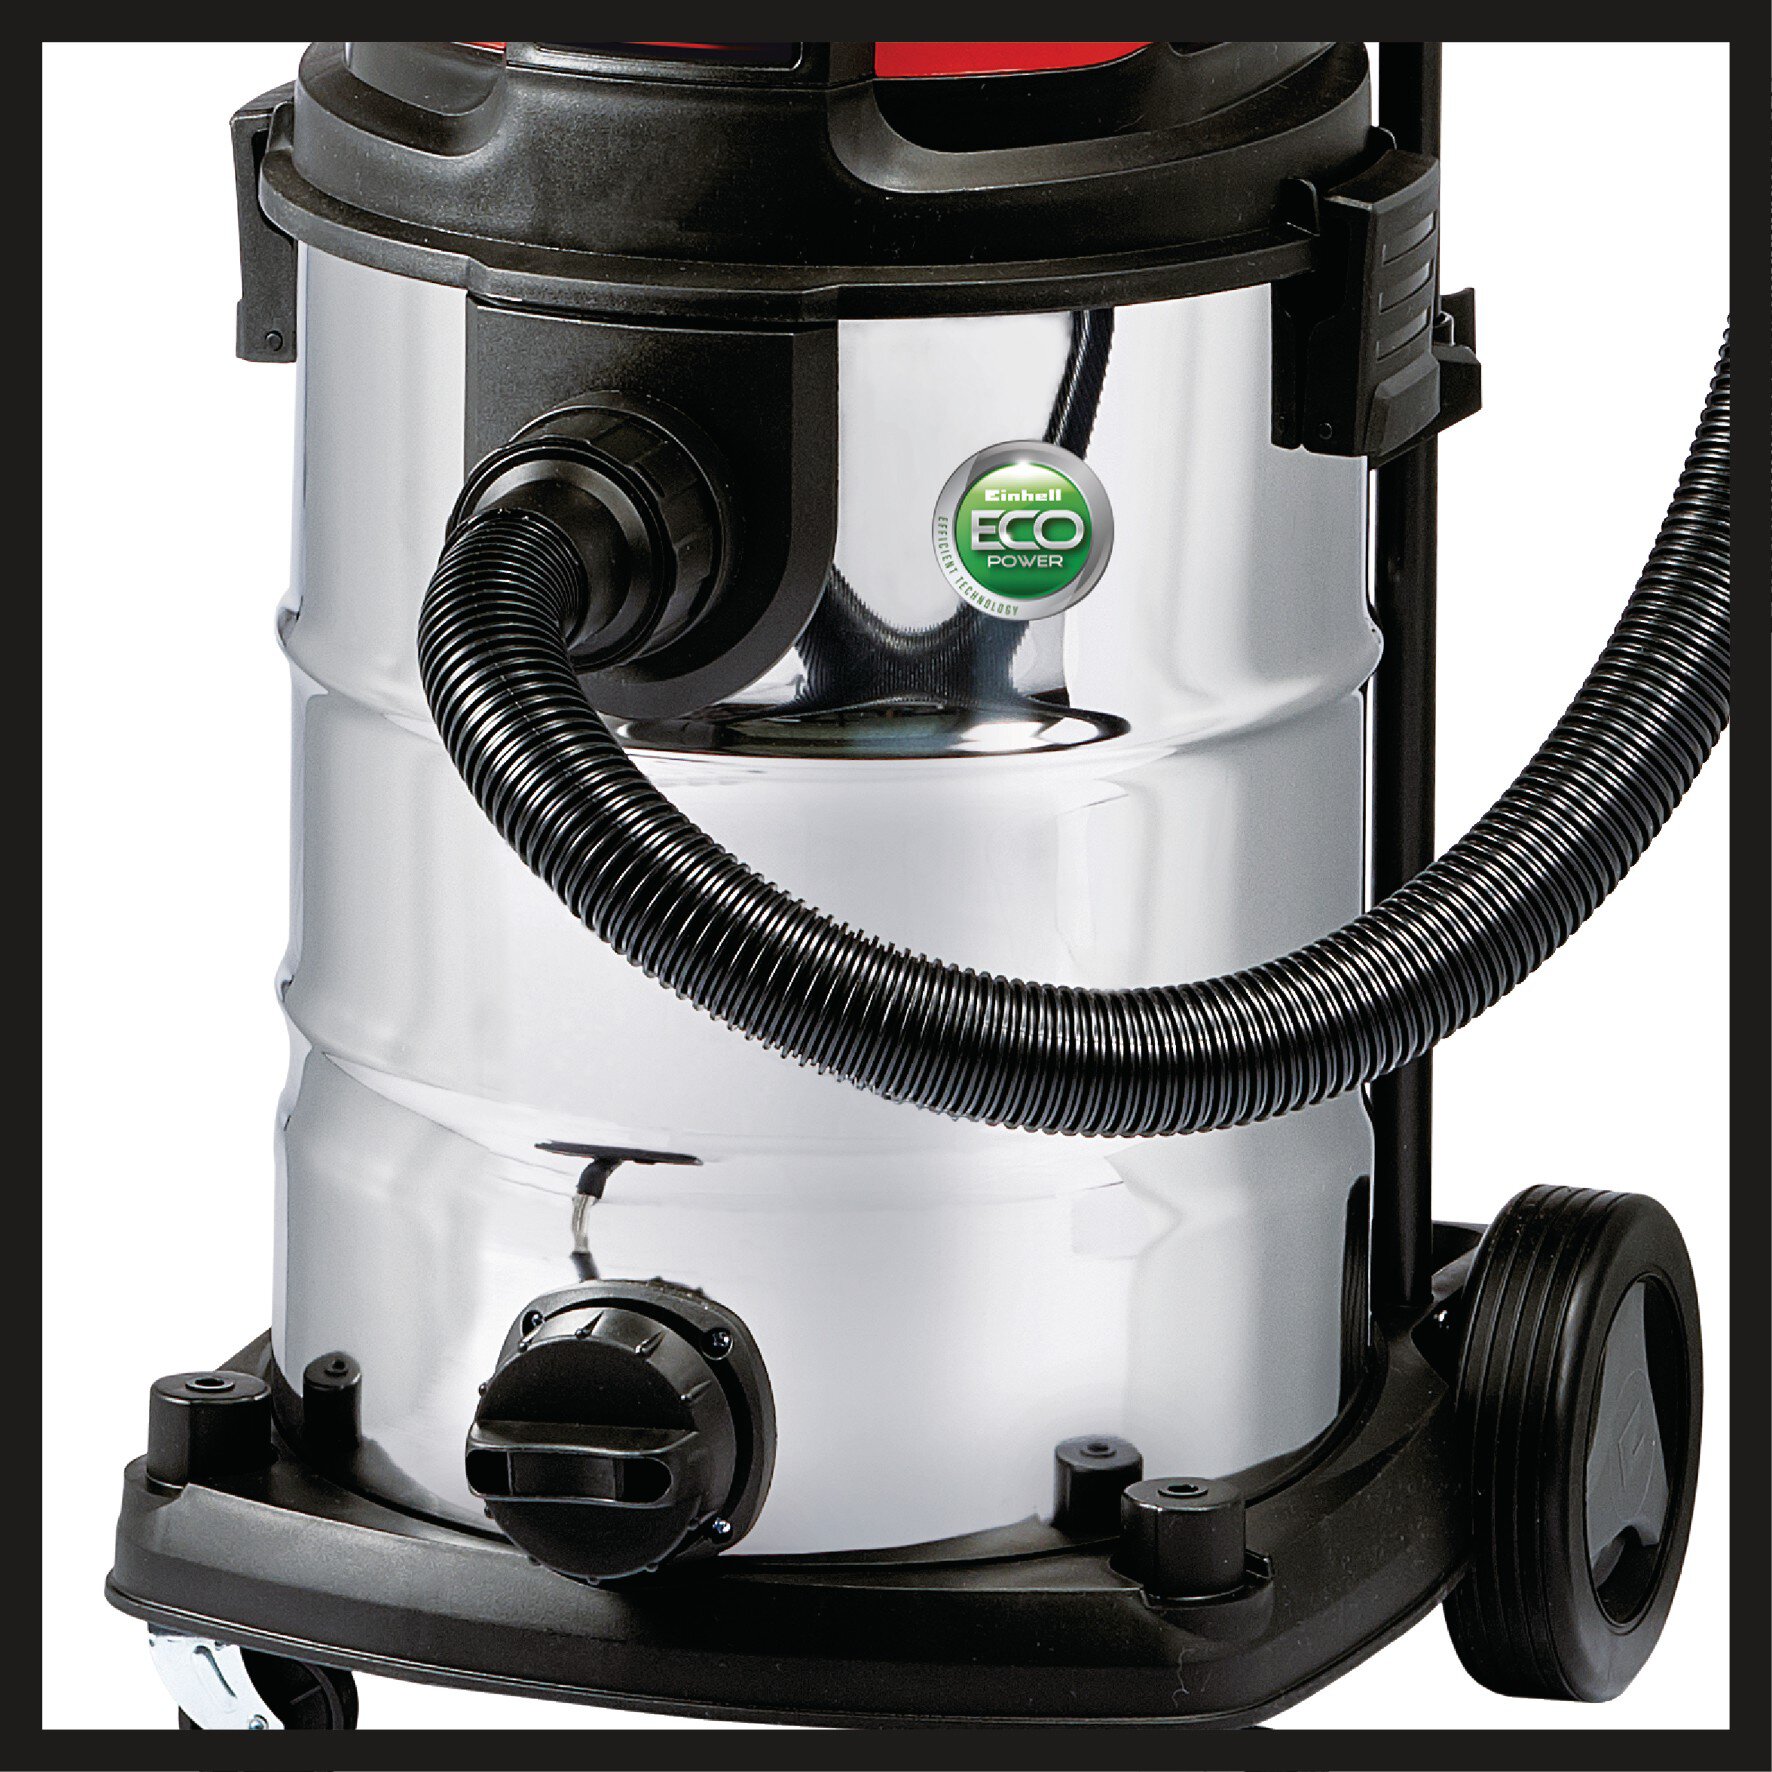 einhell-expert-wet-dry-vacuum-cleaner-elect-2342363-detail_image-101